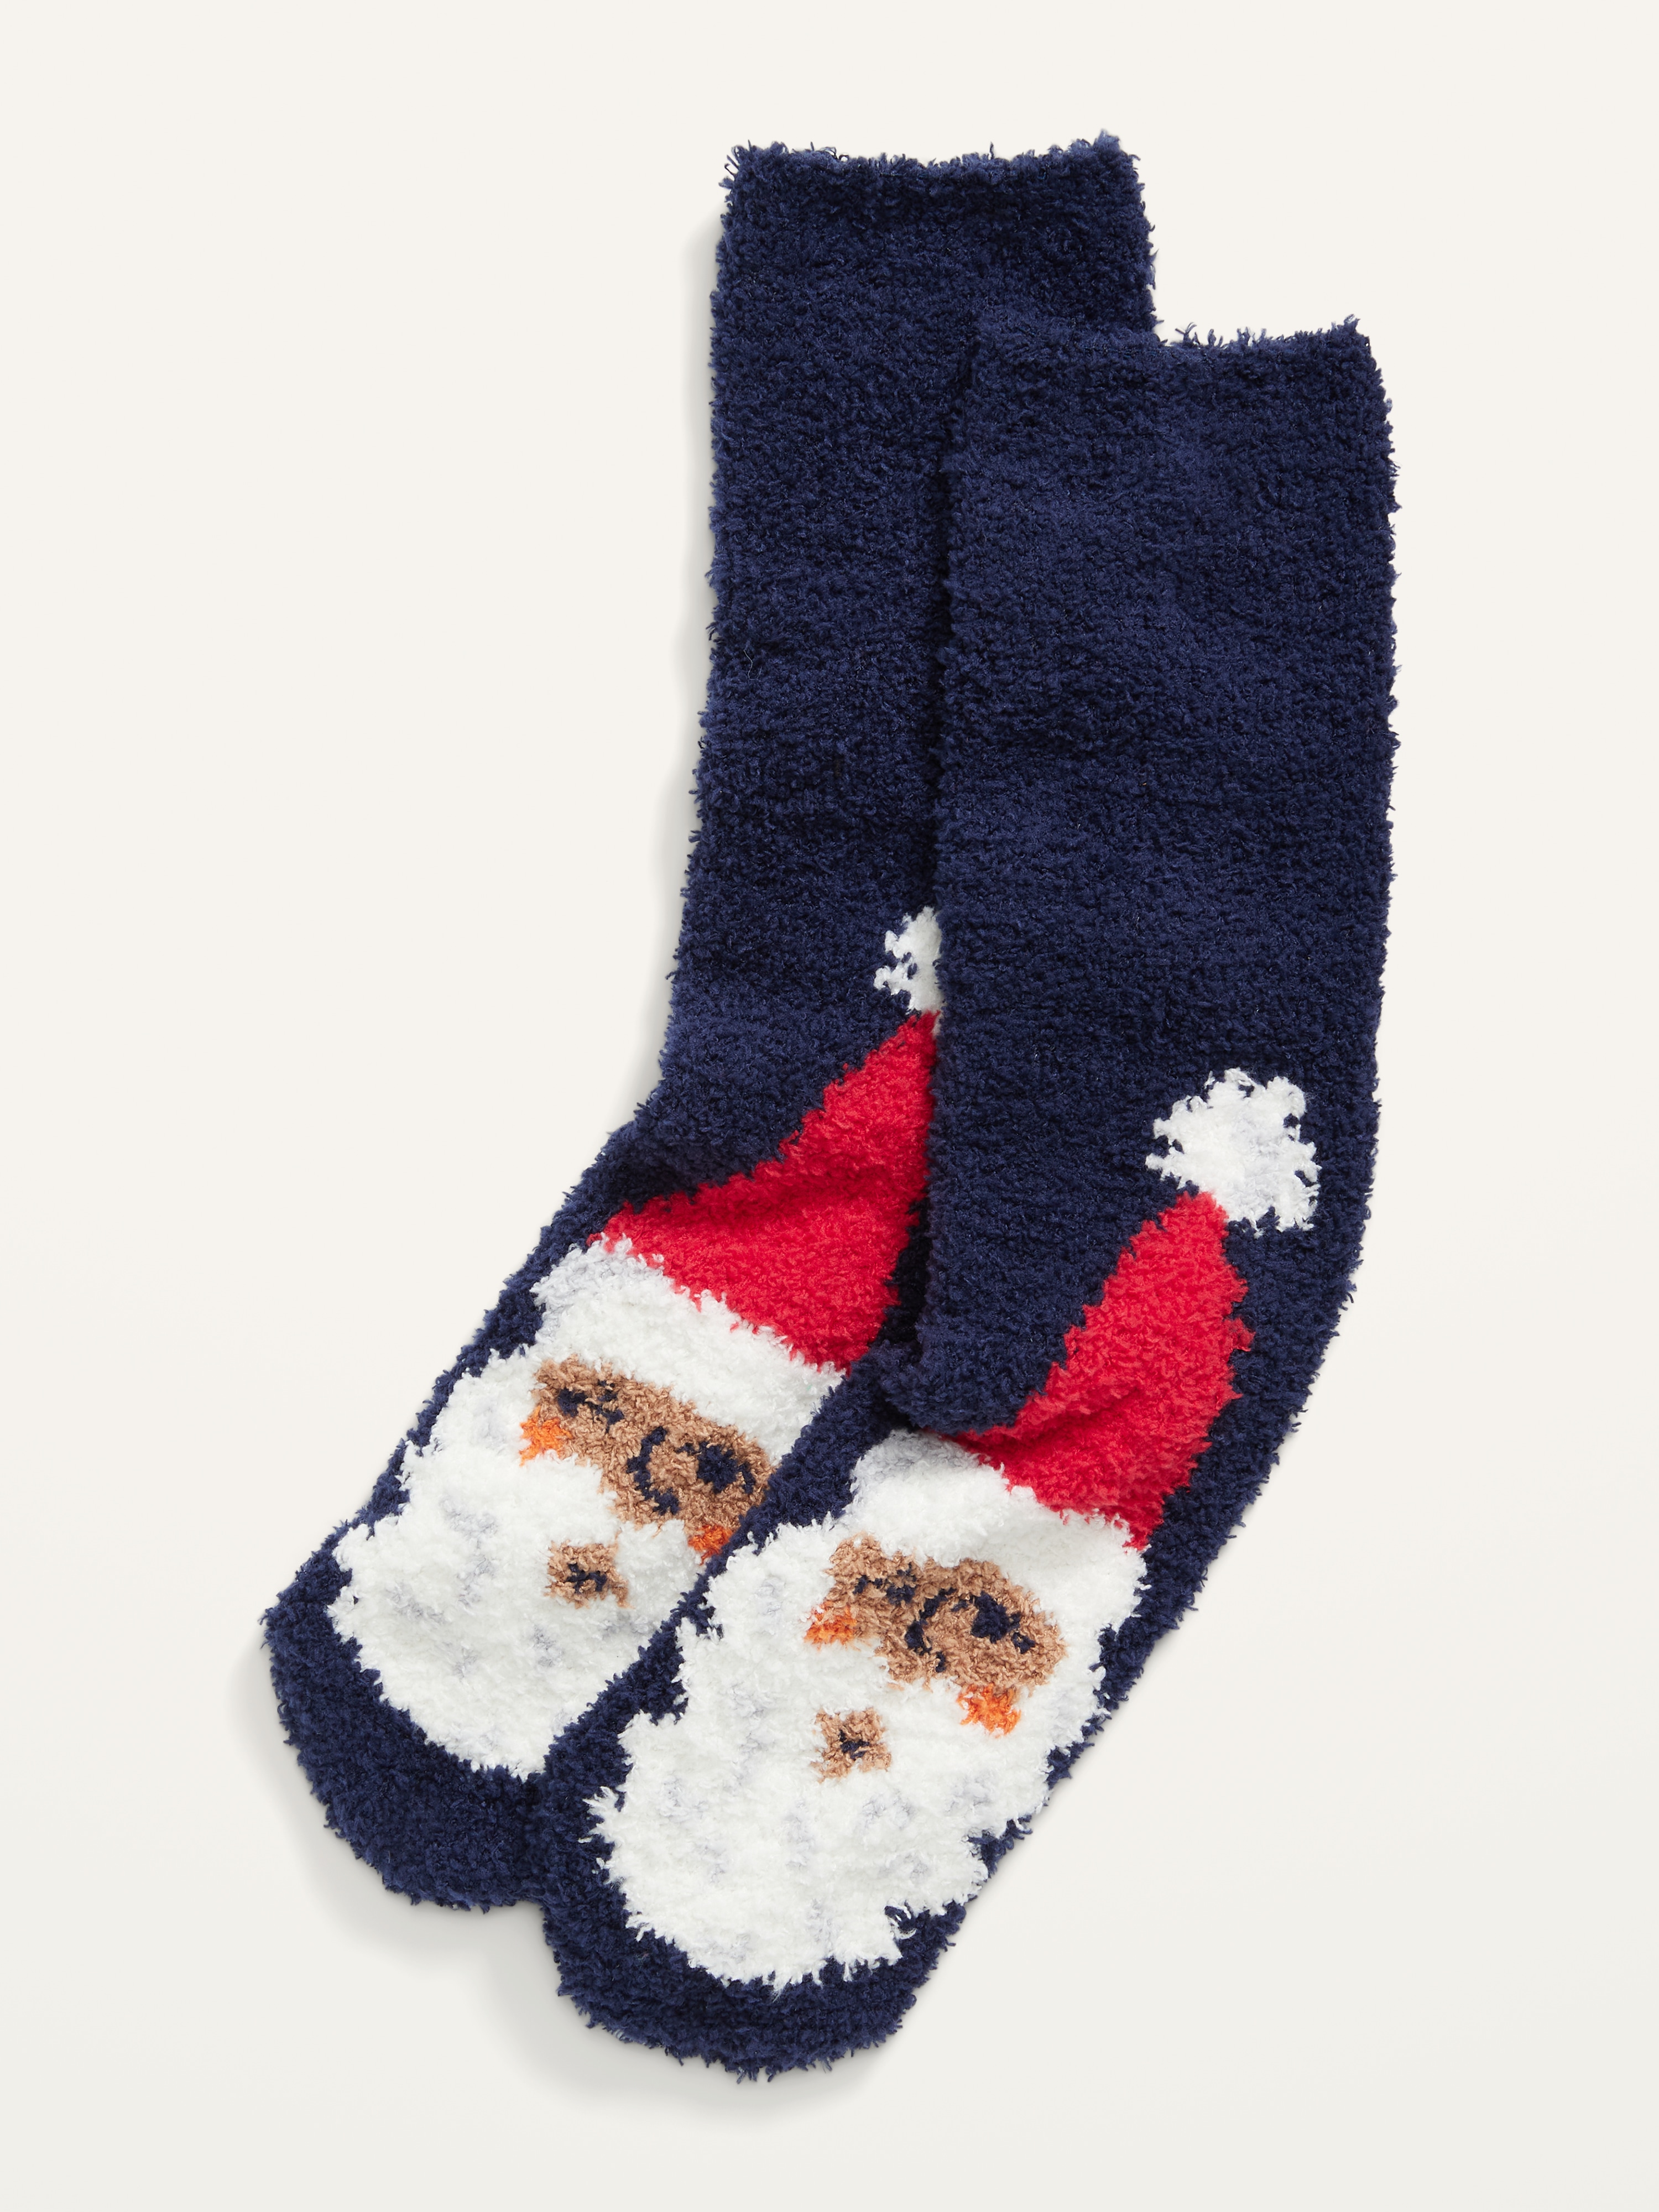 Old Navy Cozy Fuzzy Socks 2 sold out 15 Different Variations left Brand New! 